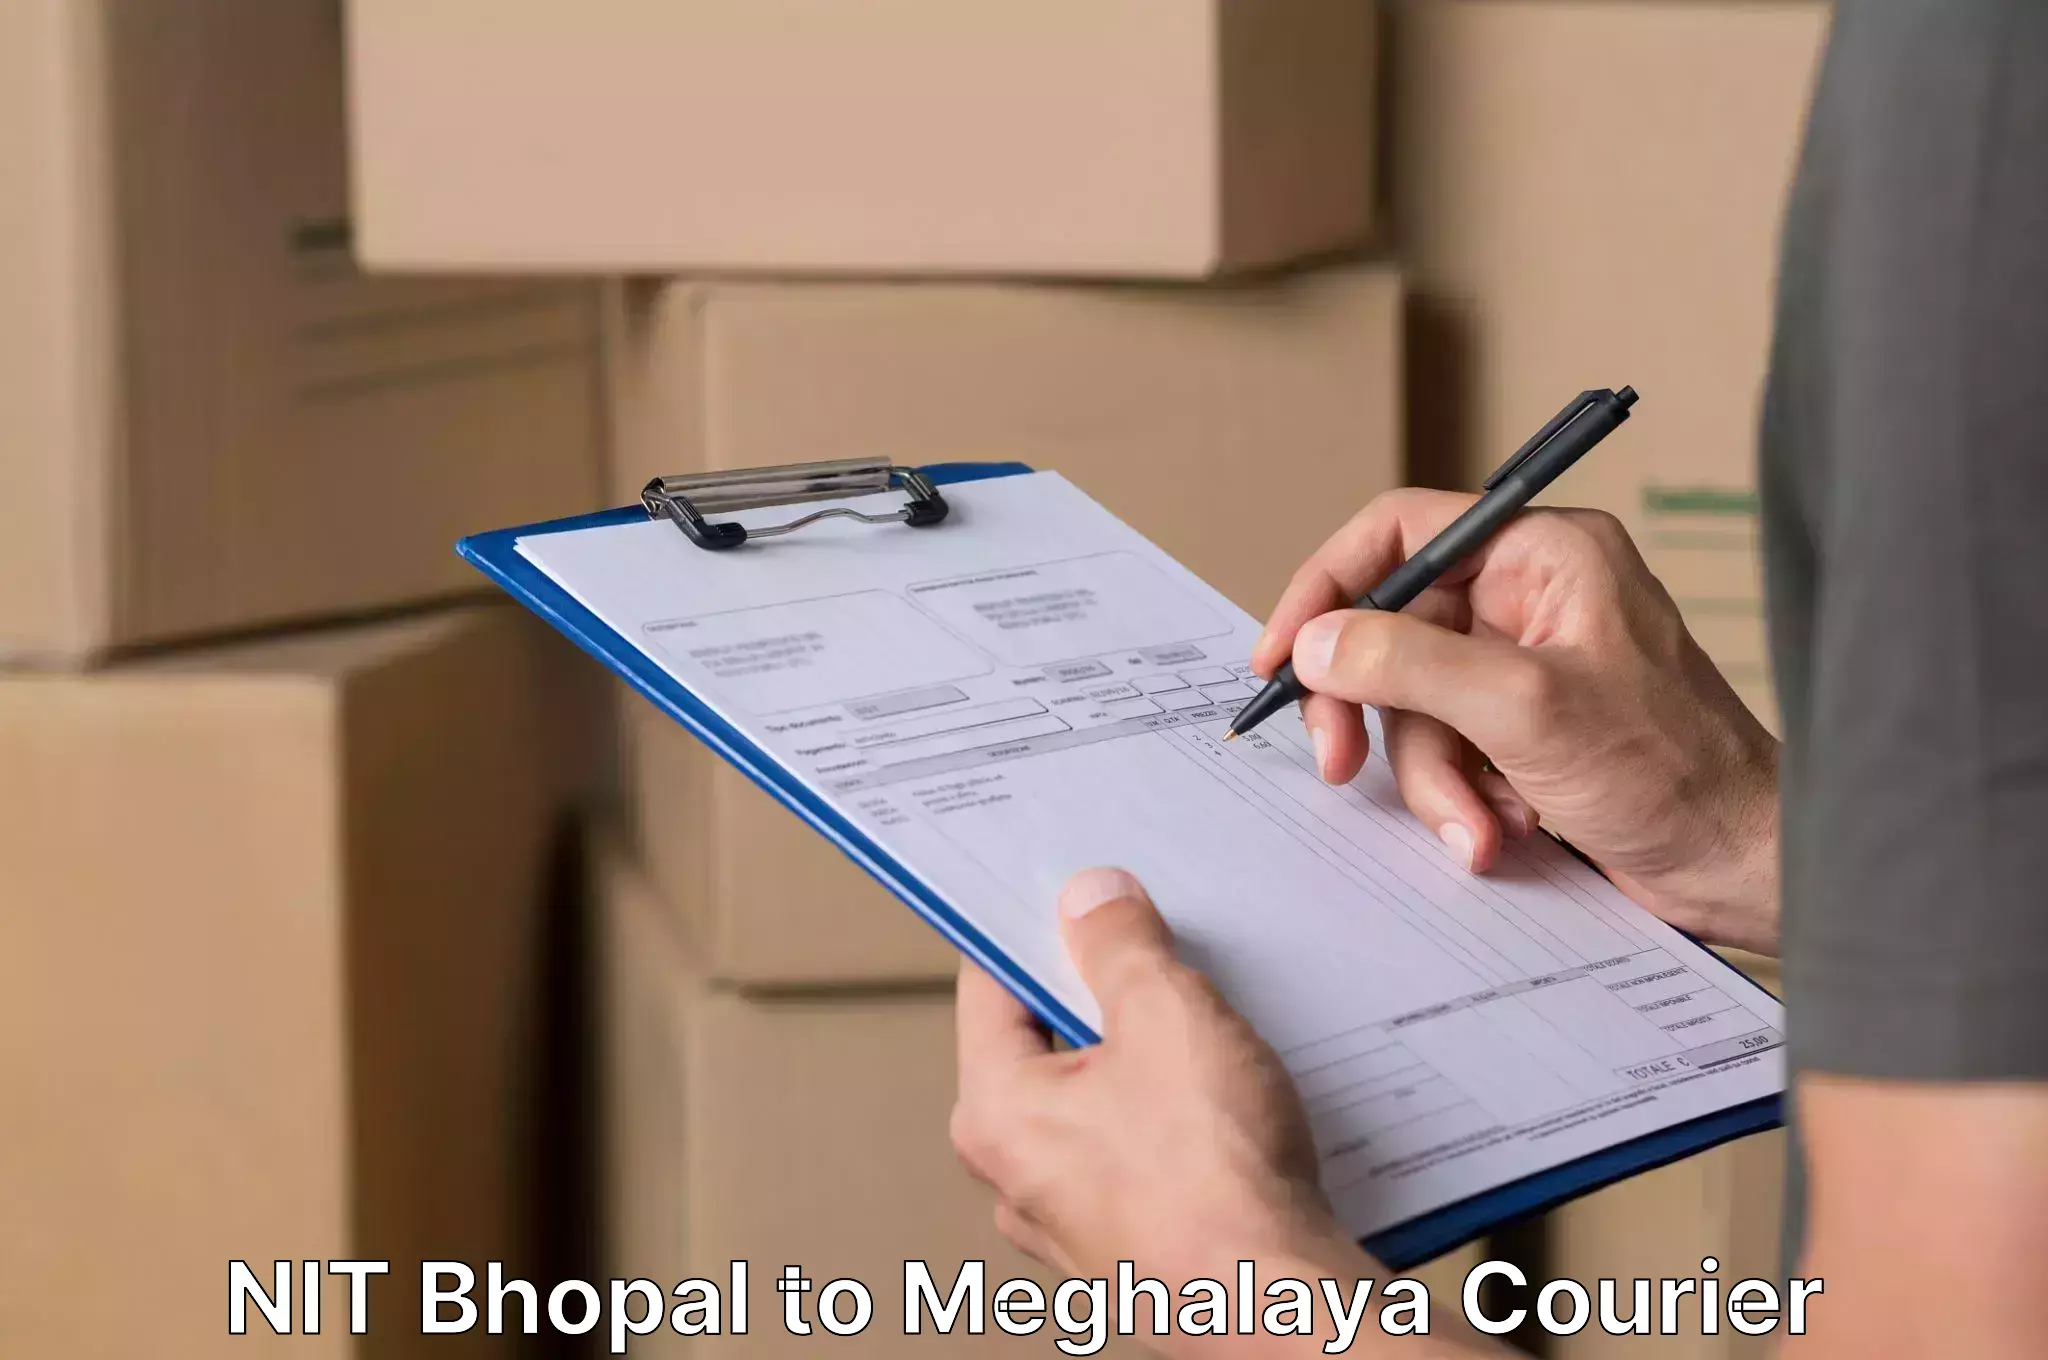 Hassle-free relocation in NIT Bhopal to NIT Meghalaya